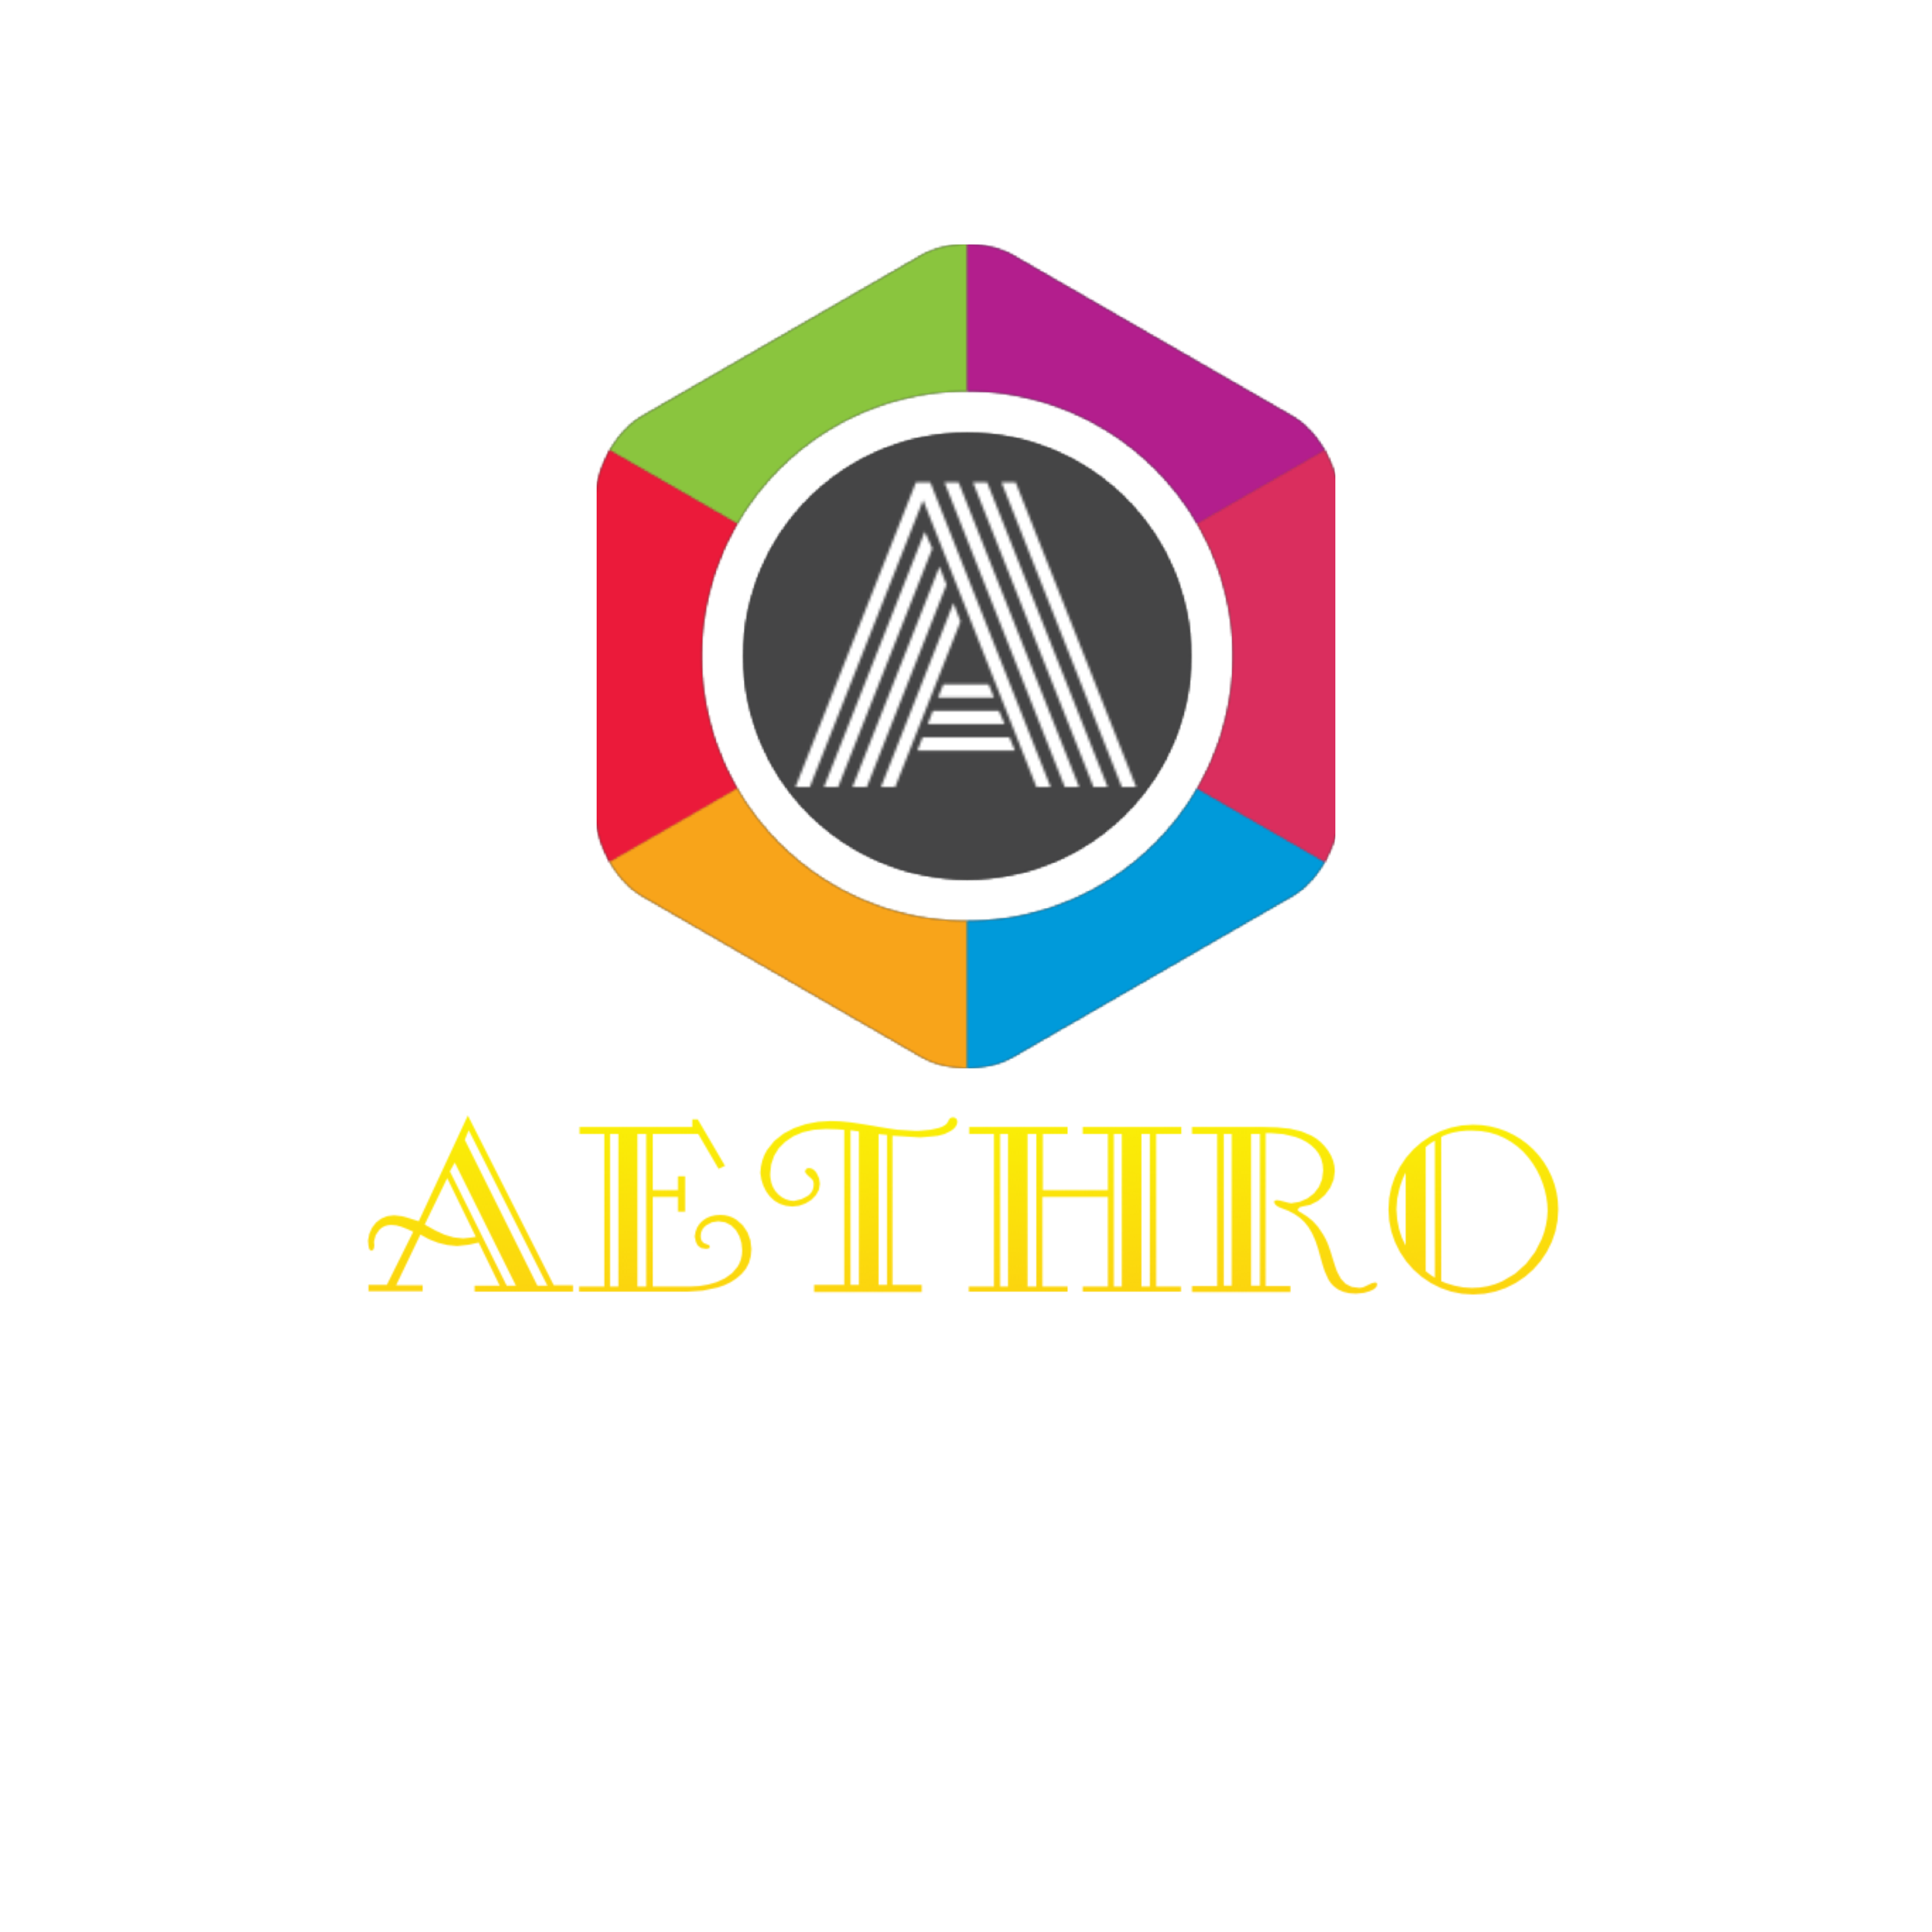 More information about "Aethro's end of the year..and what's to come"